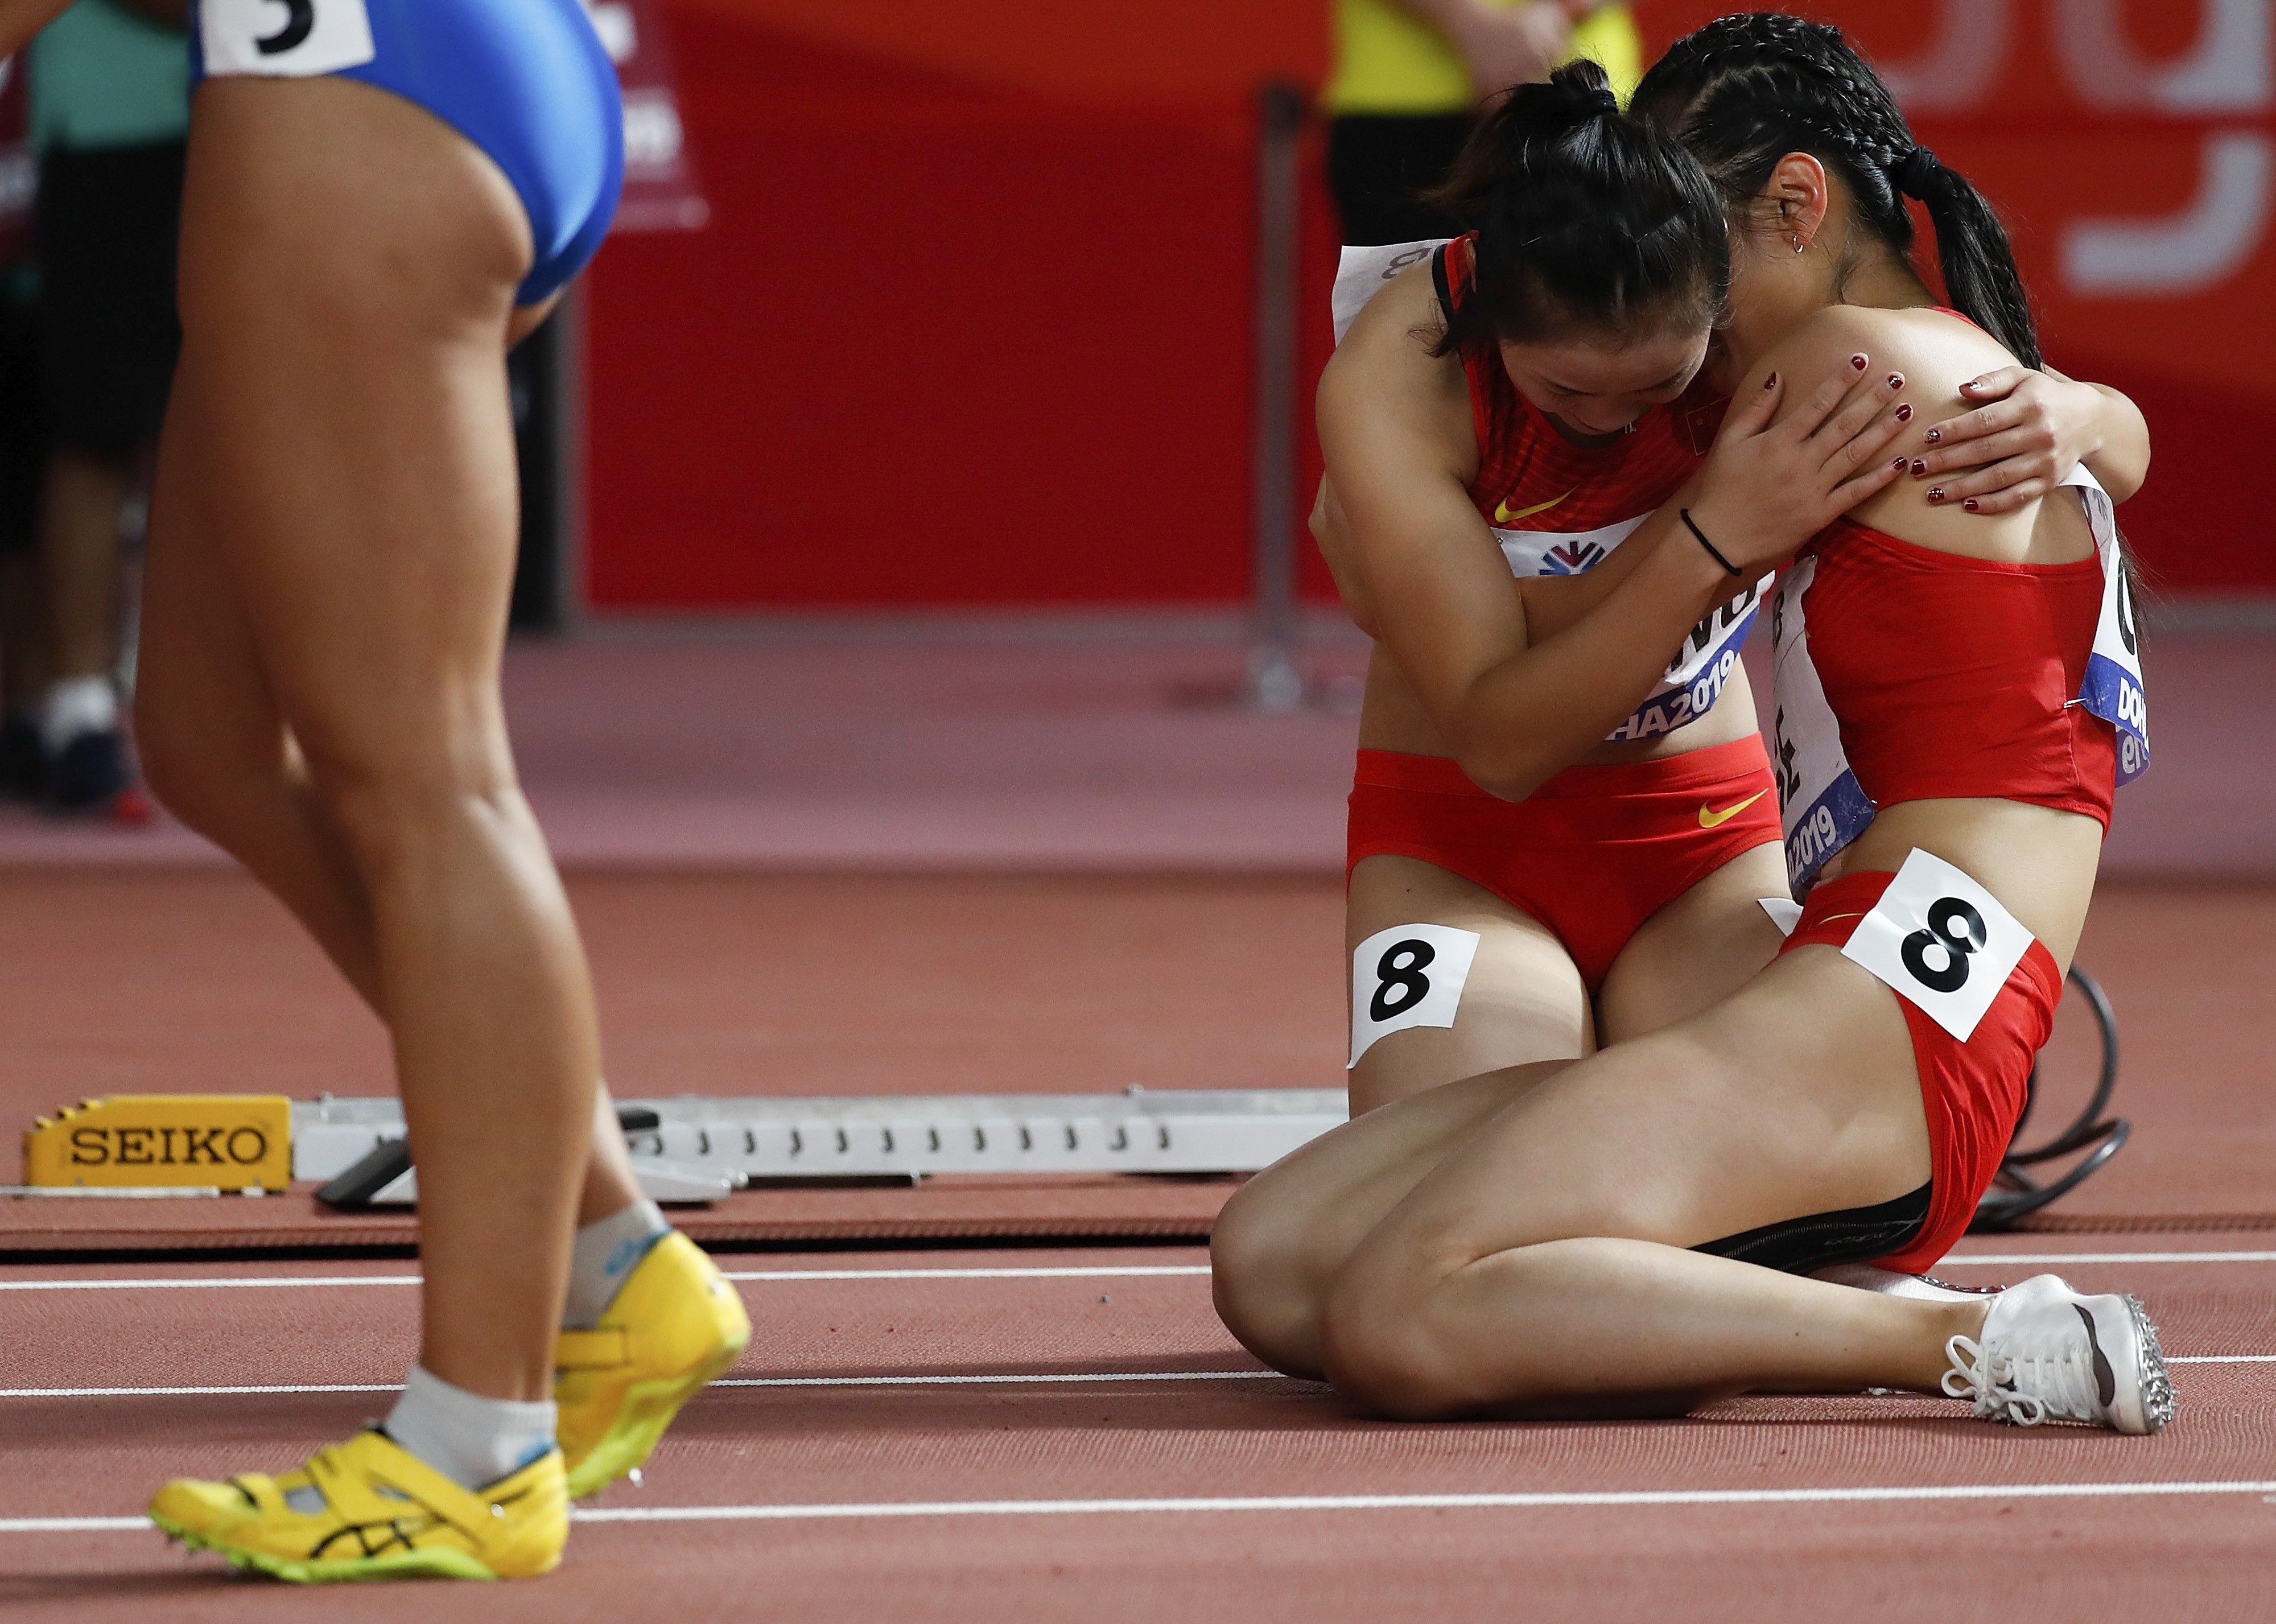 Ge Manqi (right) is comforted by her teammate Liang Xiaojing after the women’s 4x100m relay final at the 2019 IAAF World Athletics Championships in Doha. Photo: Xinhua